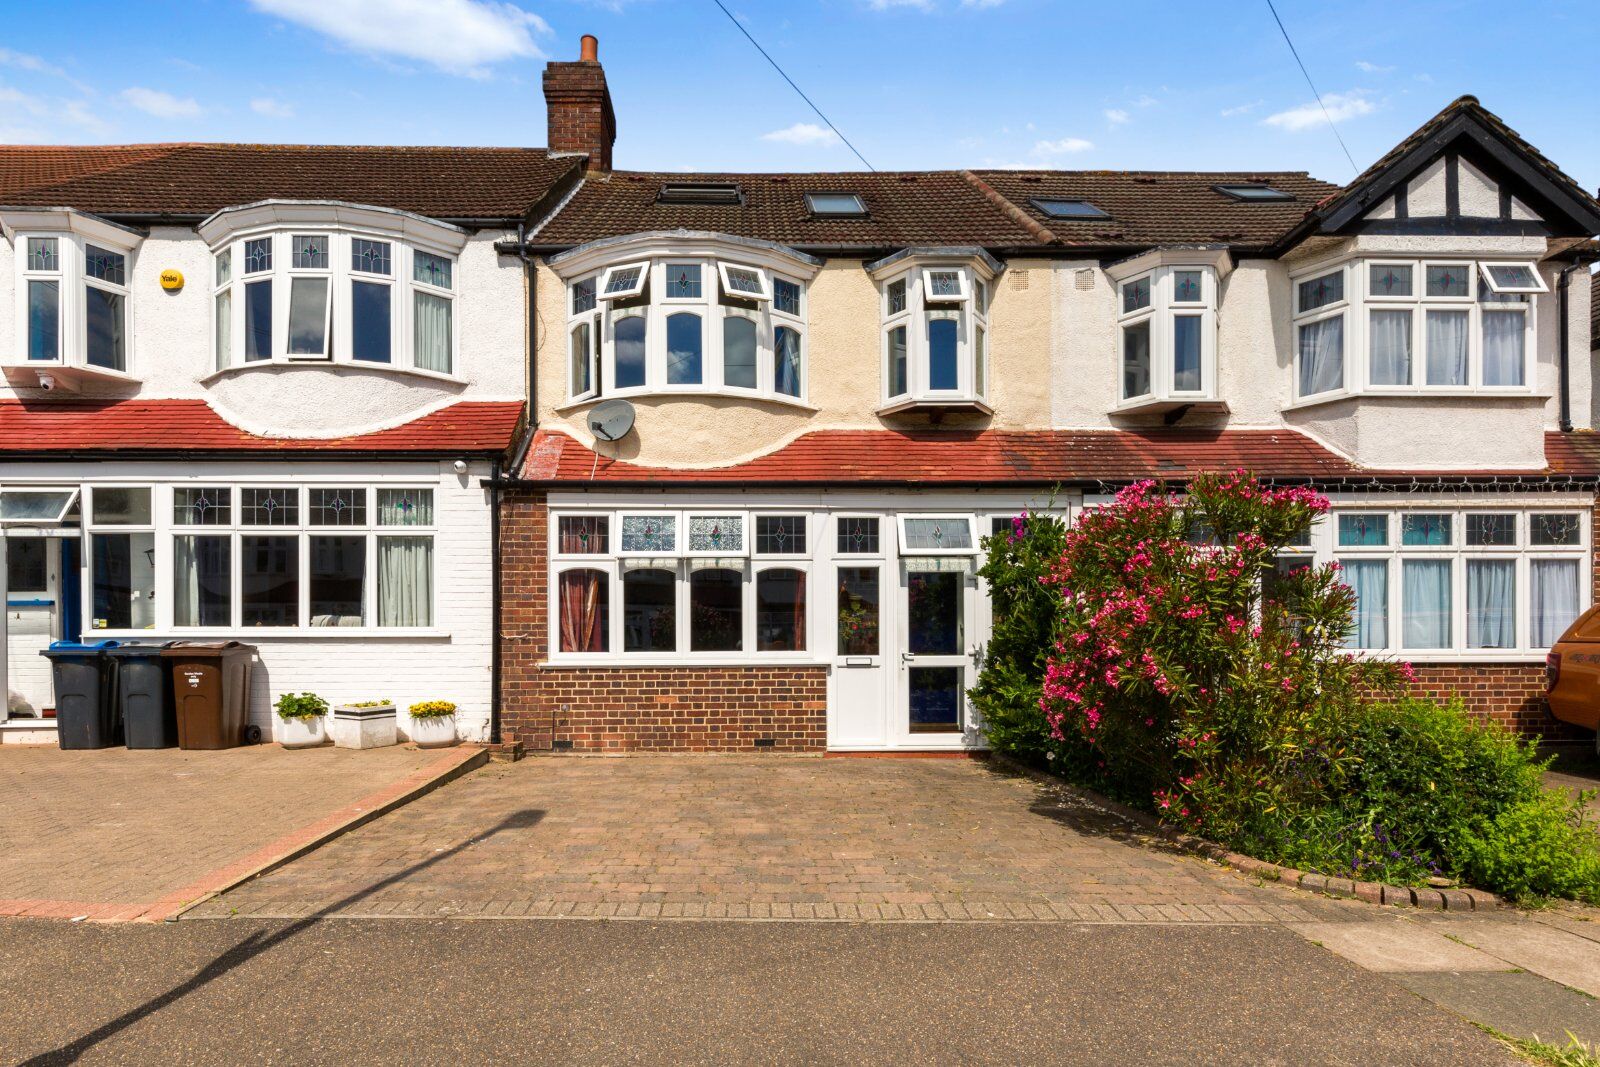 4 bedroom mid terraced house for sale The Green, Morden, SM4, main image